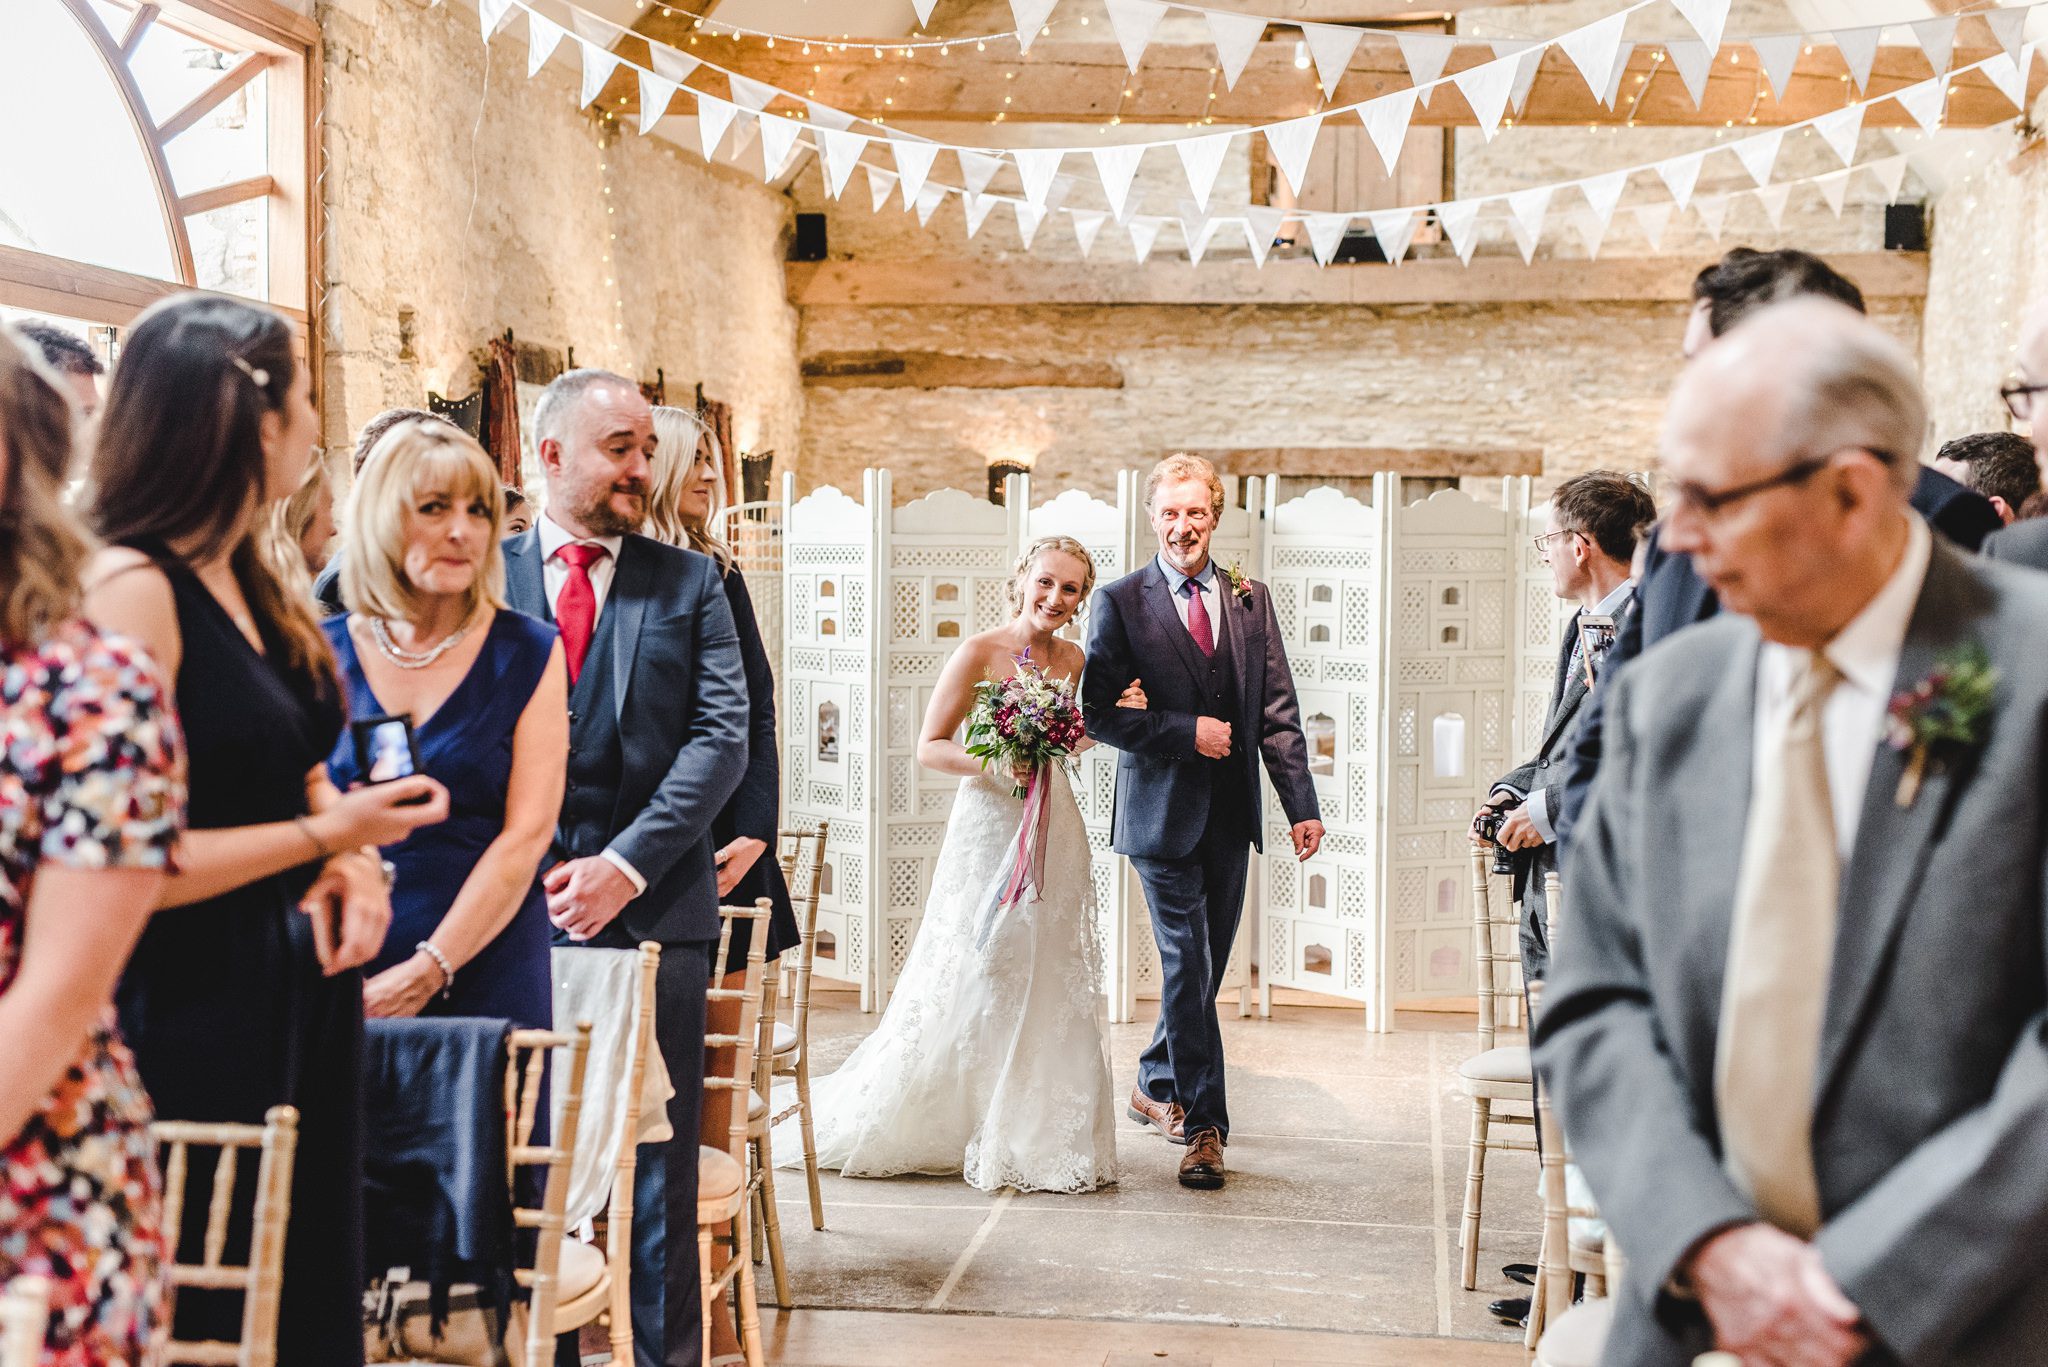 Bride and her father walking down the aisle at Oxleaze Barn